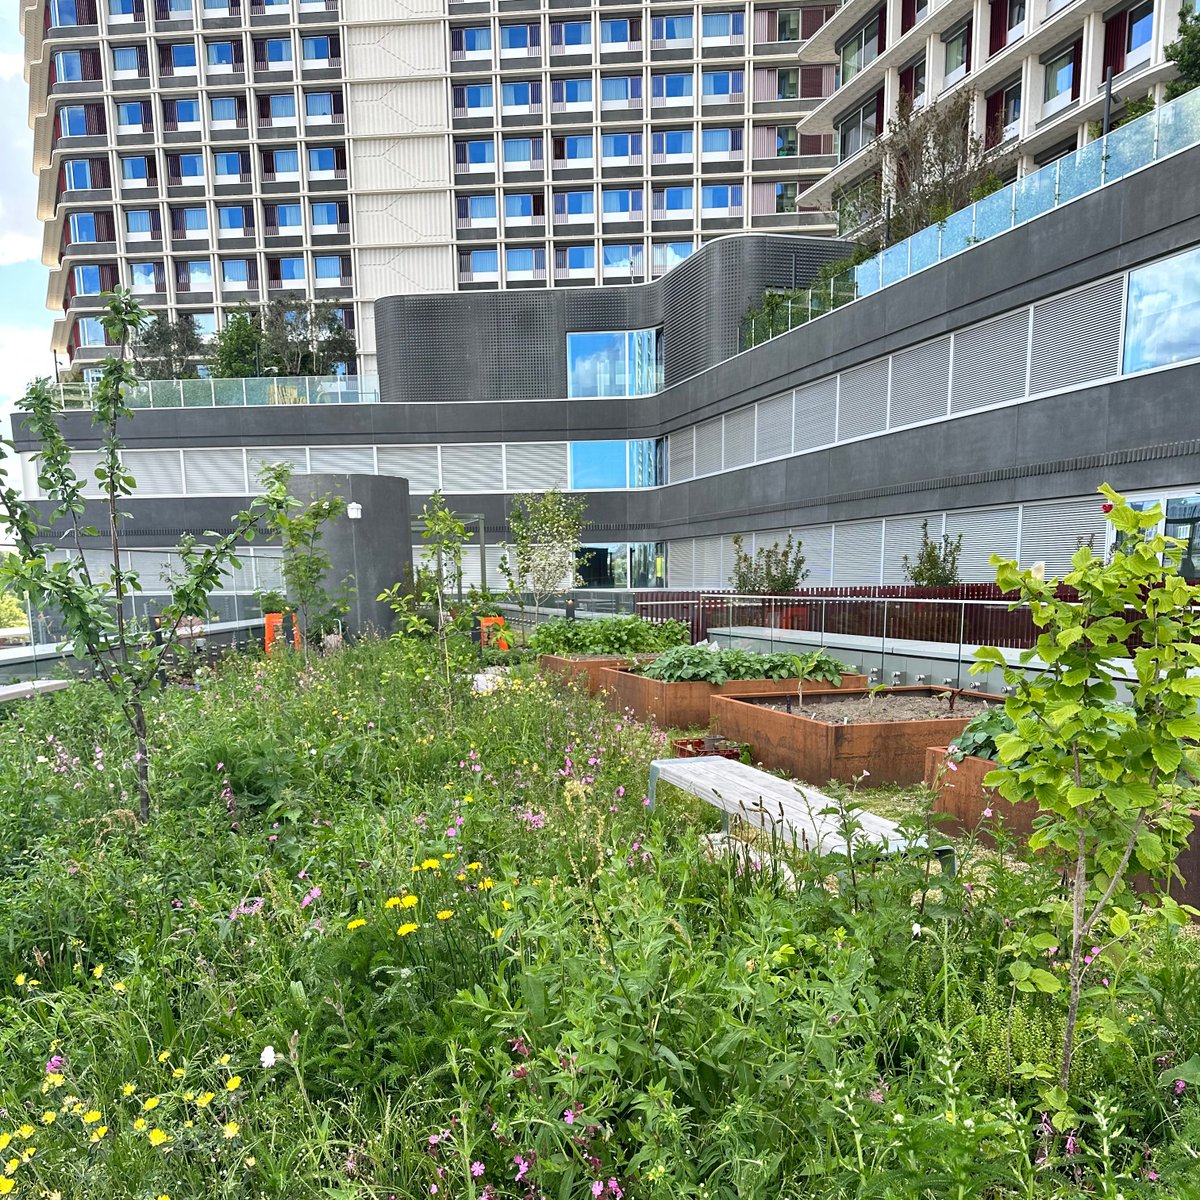 🌿Join us tomorrow for the launch of the People and Nature Lab's roof garden! Don't miss the inaugural seminar by @NigelDunnett. 
Learn more about our new garden here: ucl.ac.uk/biosciences/pe…. For event details, visit eventbrite.co.uk/e/launch-of-pe….
⏰ 22nd May 
📍UCL East, 1 Pool St